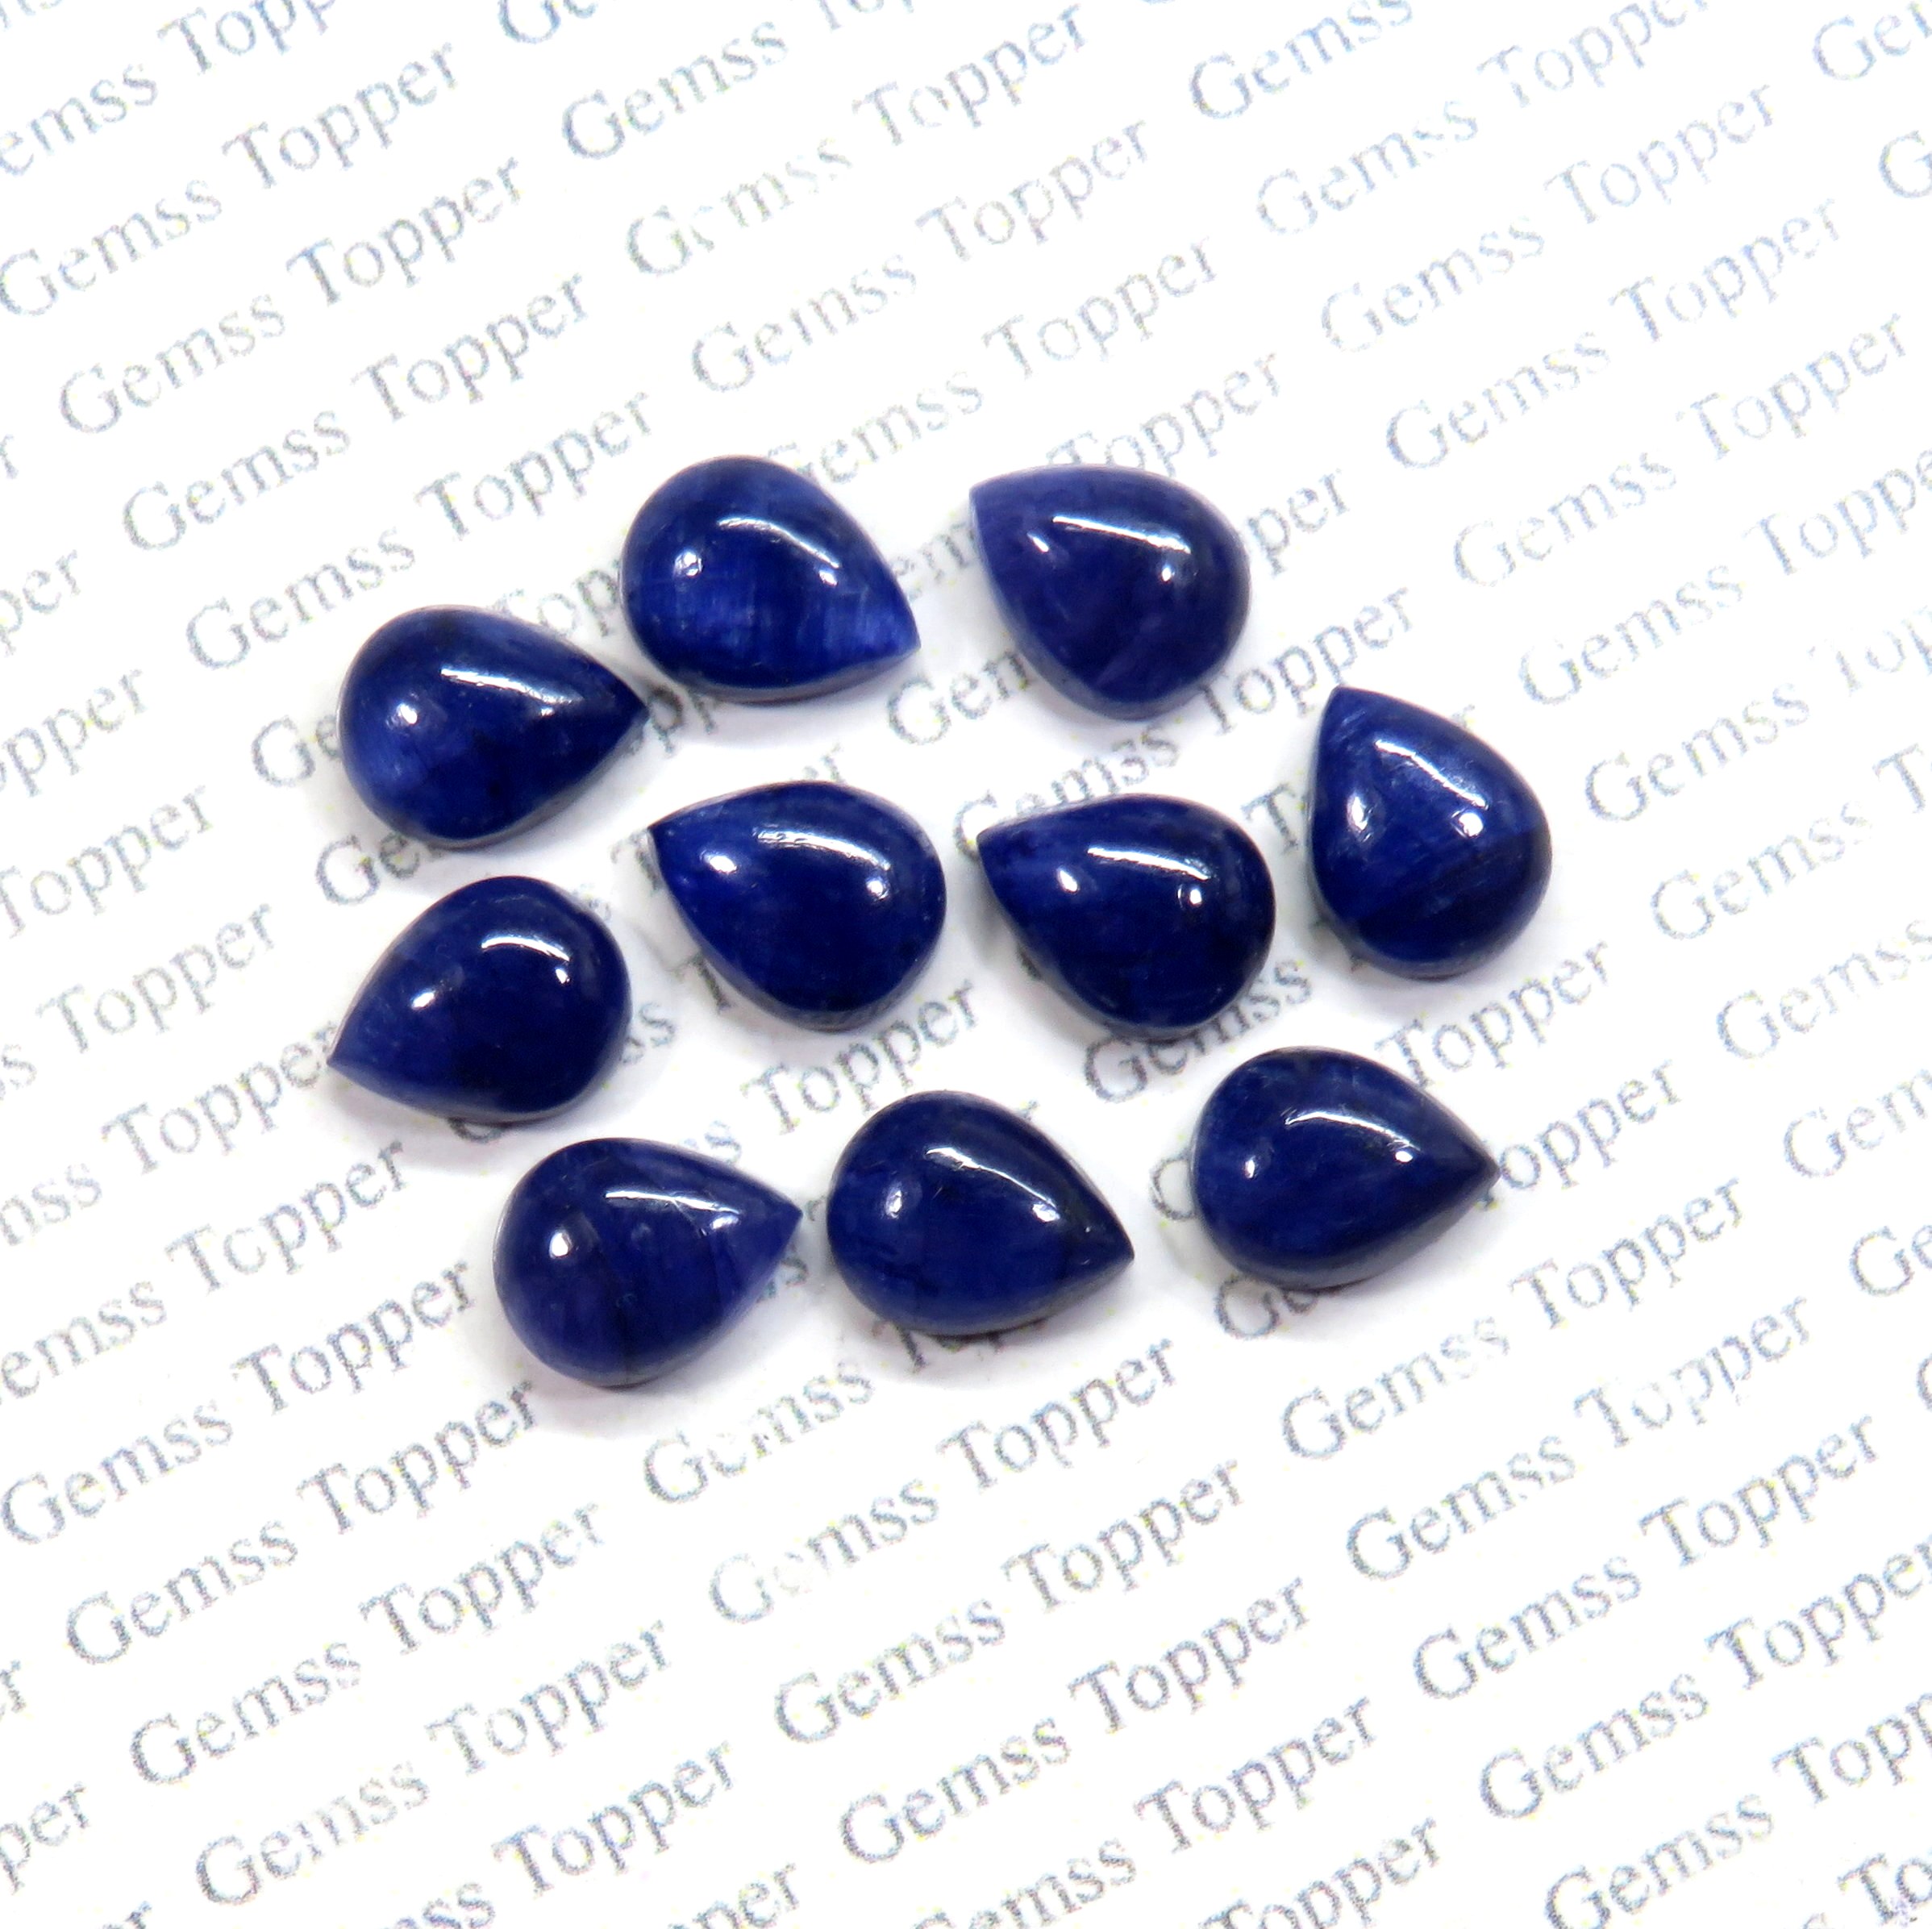 100% Natural Blue Sapphire 7x10 mm Pear Cabochon- AAA Quality Blue Sapphire Smooth Cabochon